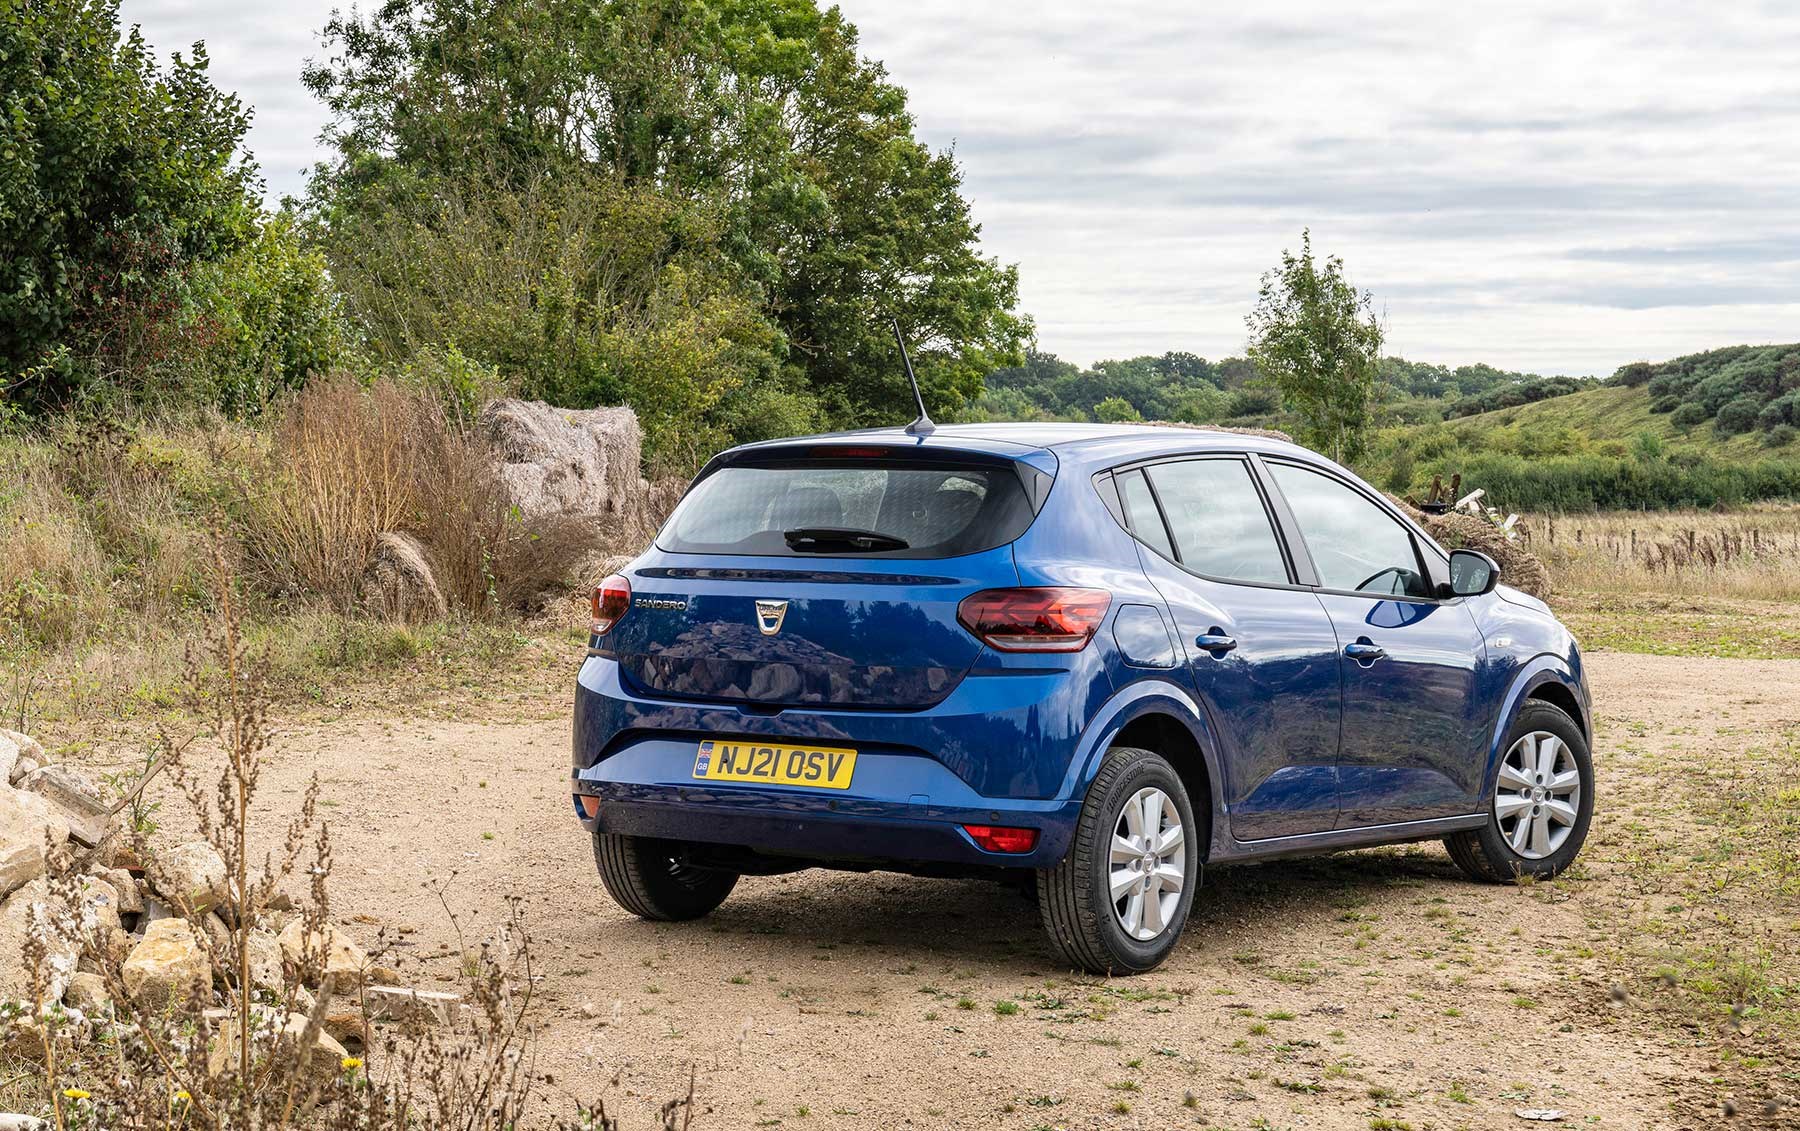 Dacia Sandero Stepway review: there's a lot more to this car than simply  great value